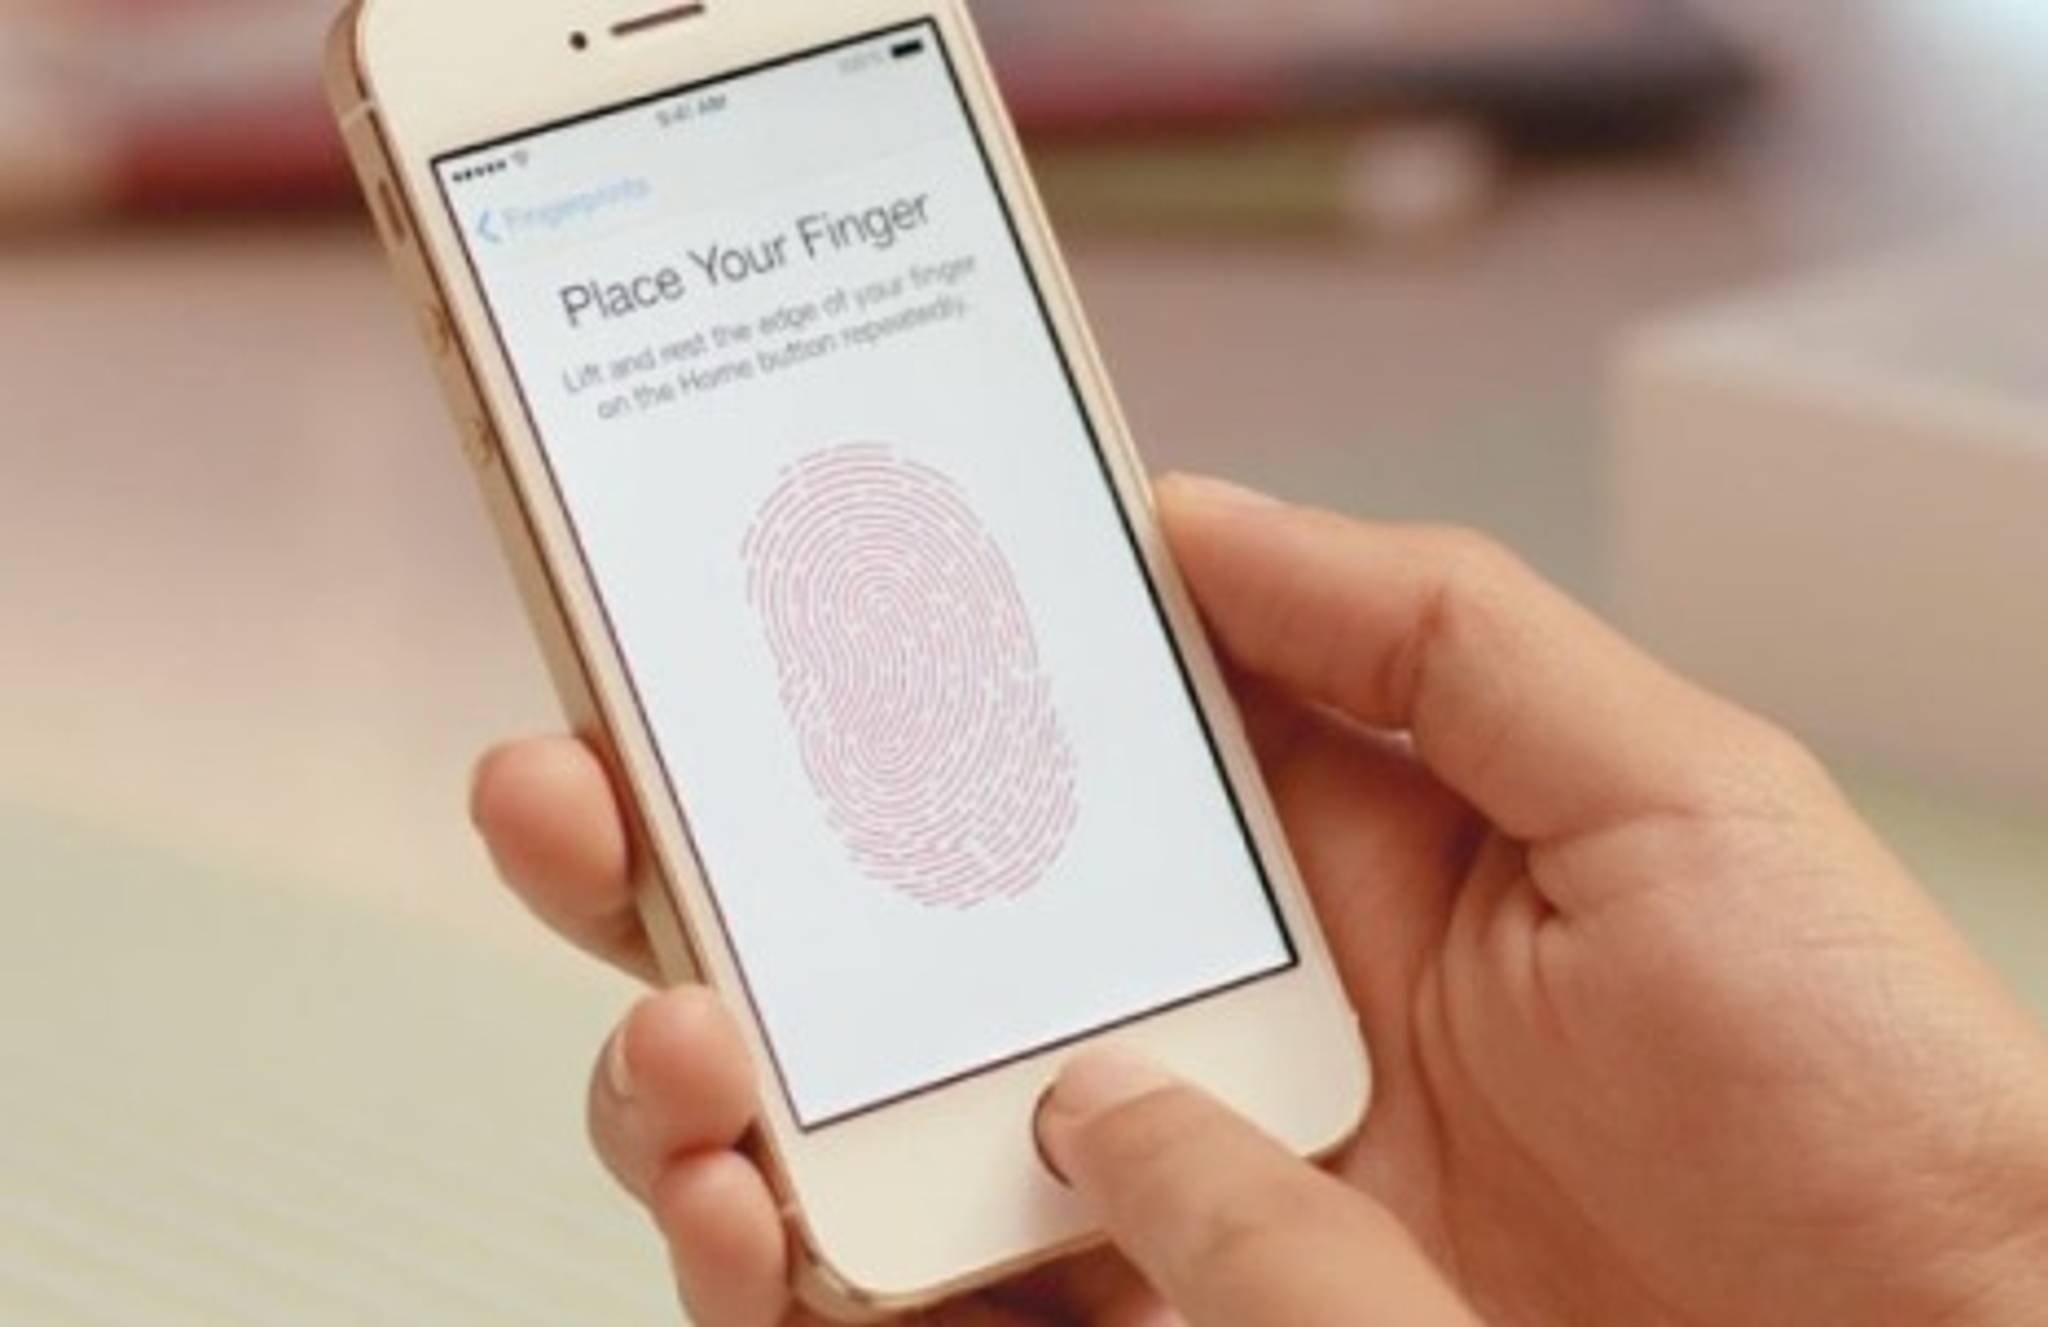 Touch ID makes for seamless m-commerce